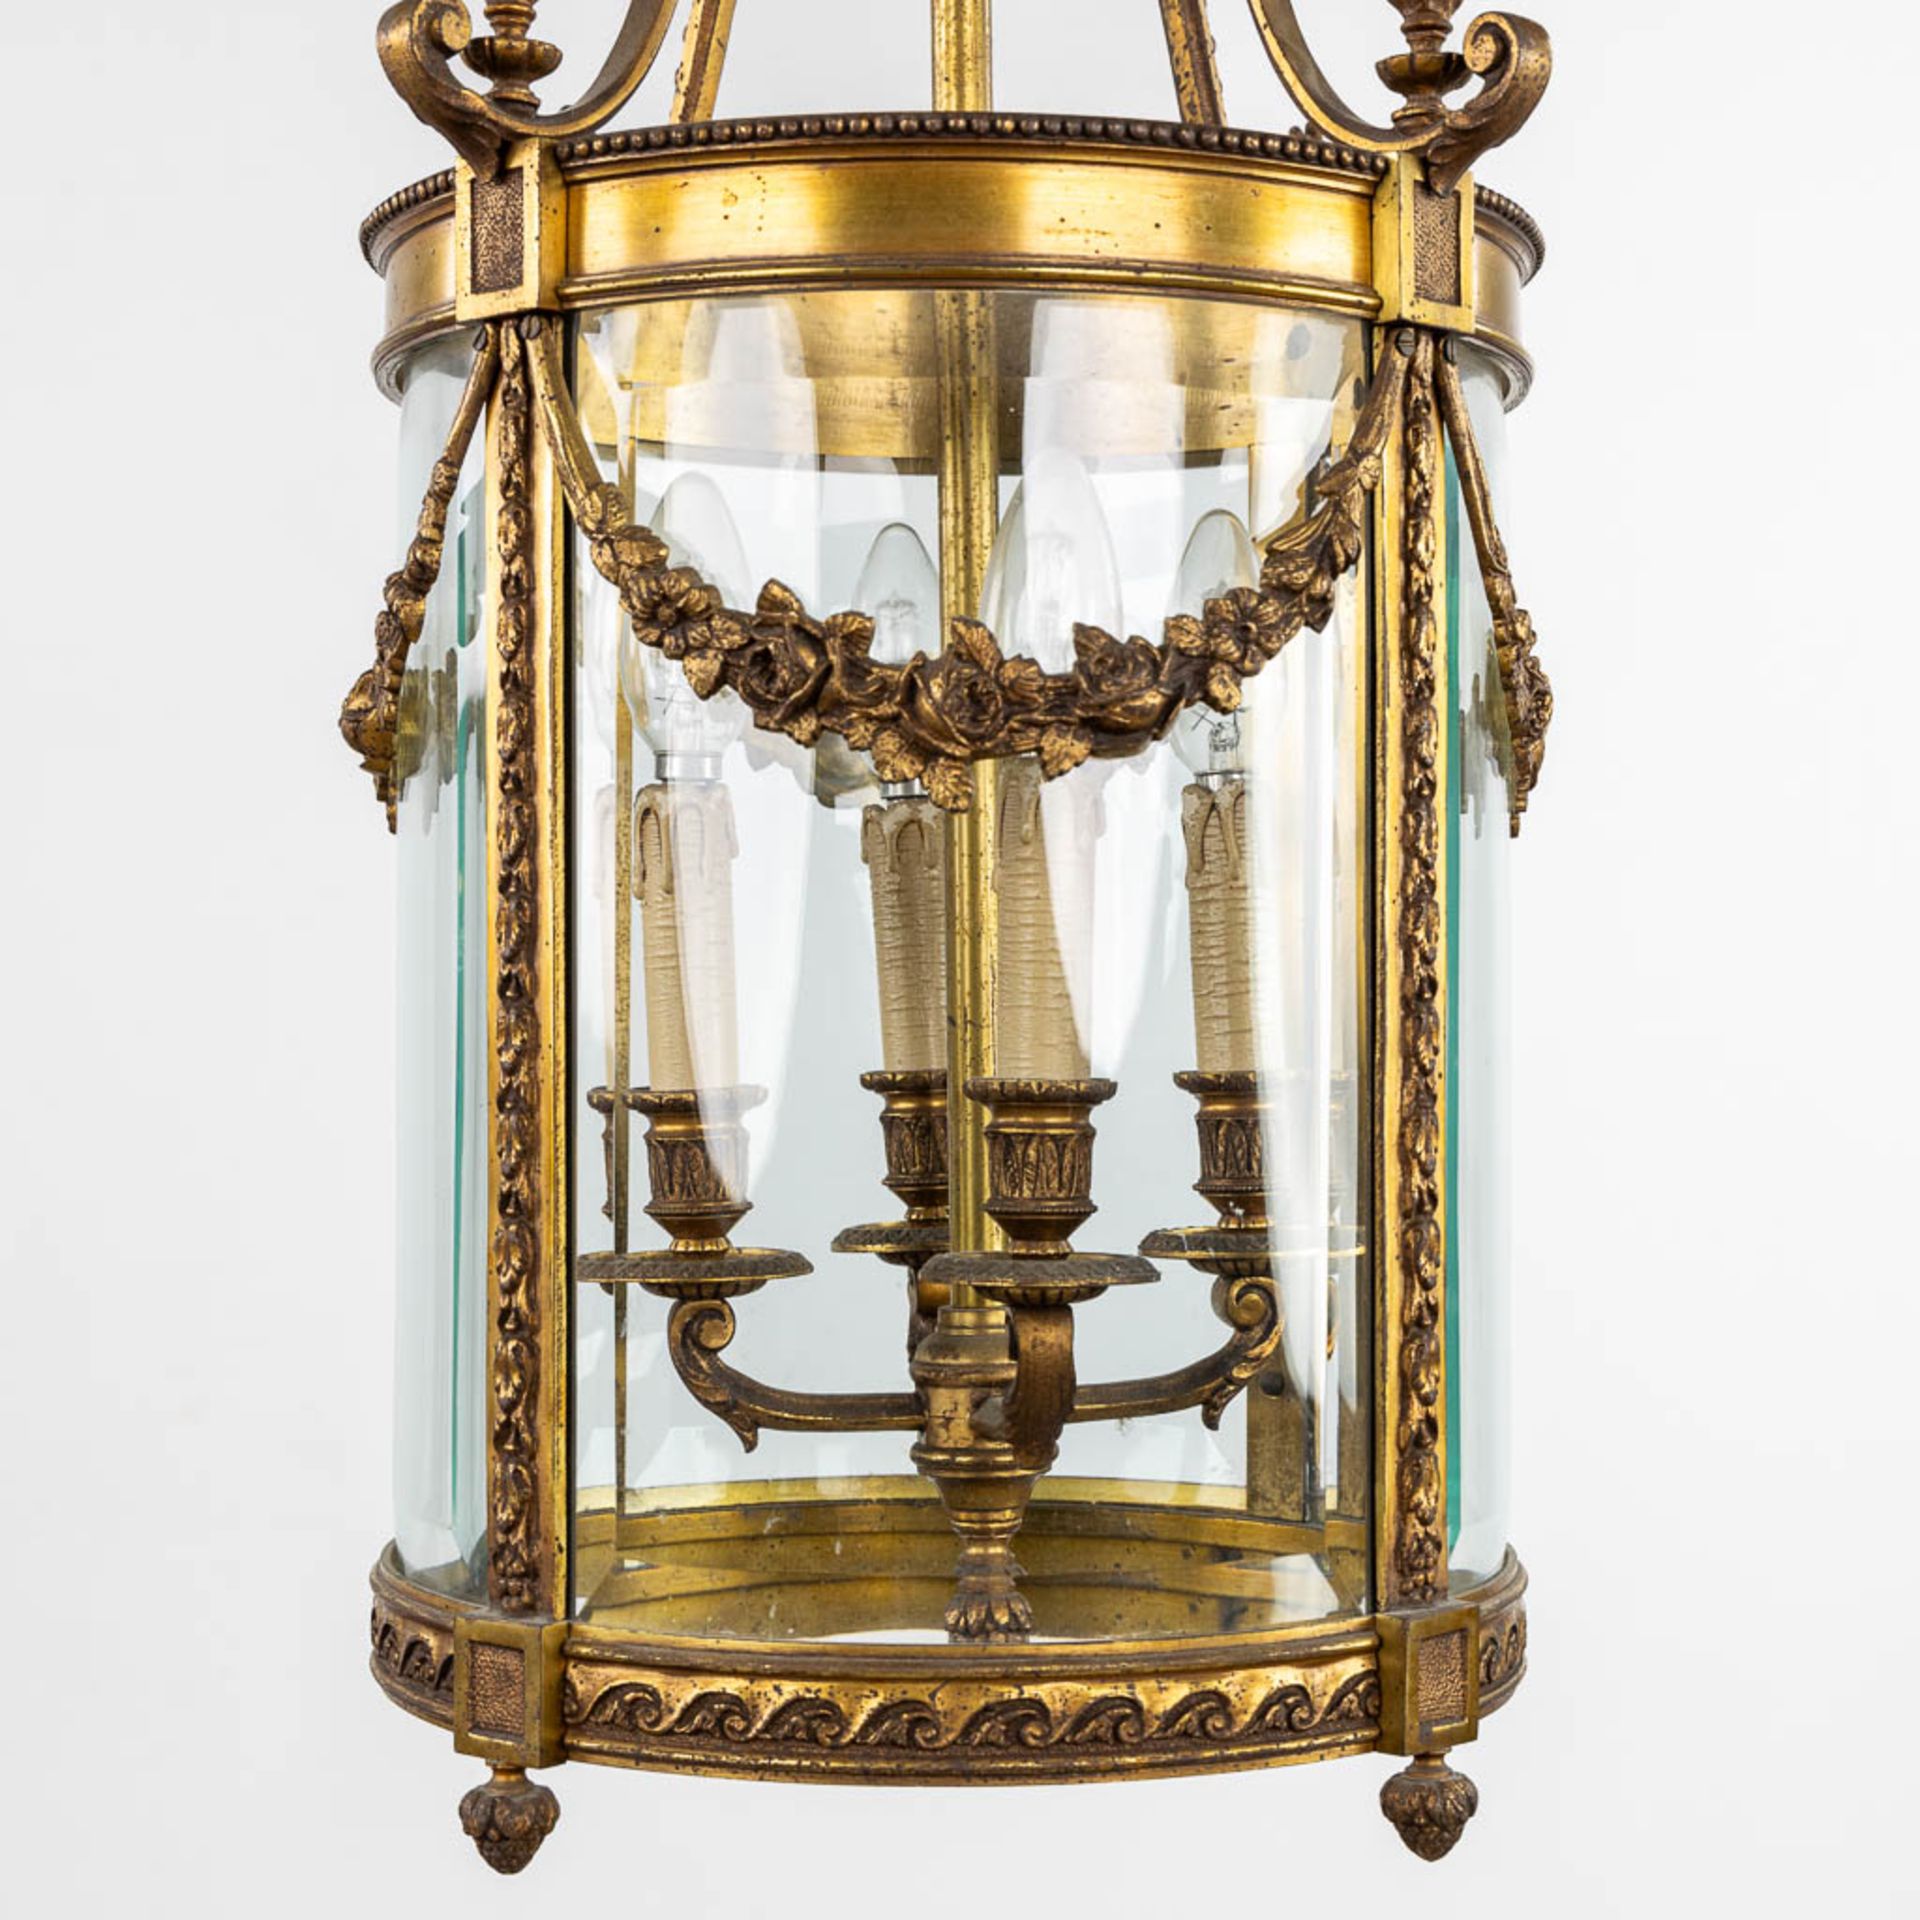 A lantern, brass and glass in Louis XVI style. (H:68 x D:37 cm) - Image 6 of 11